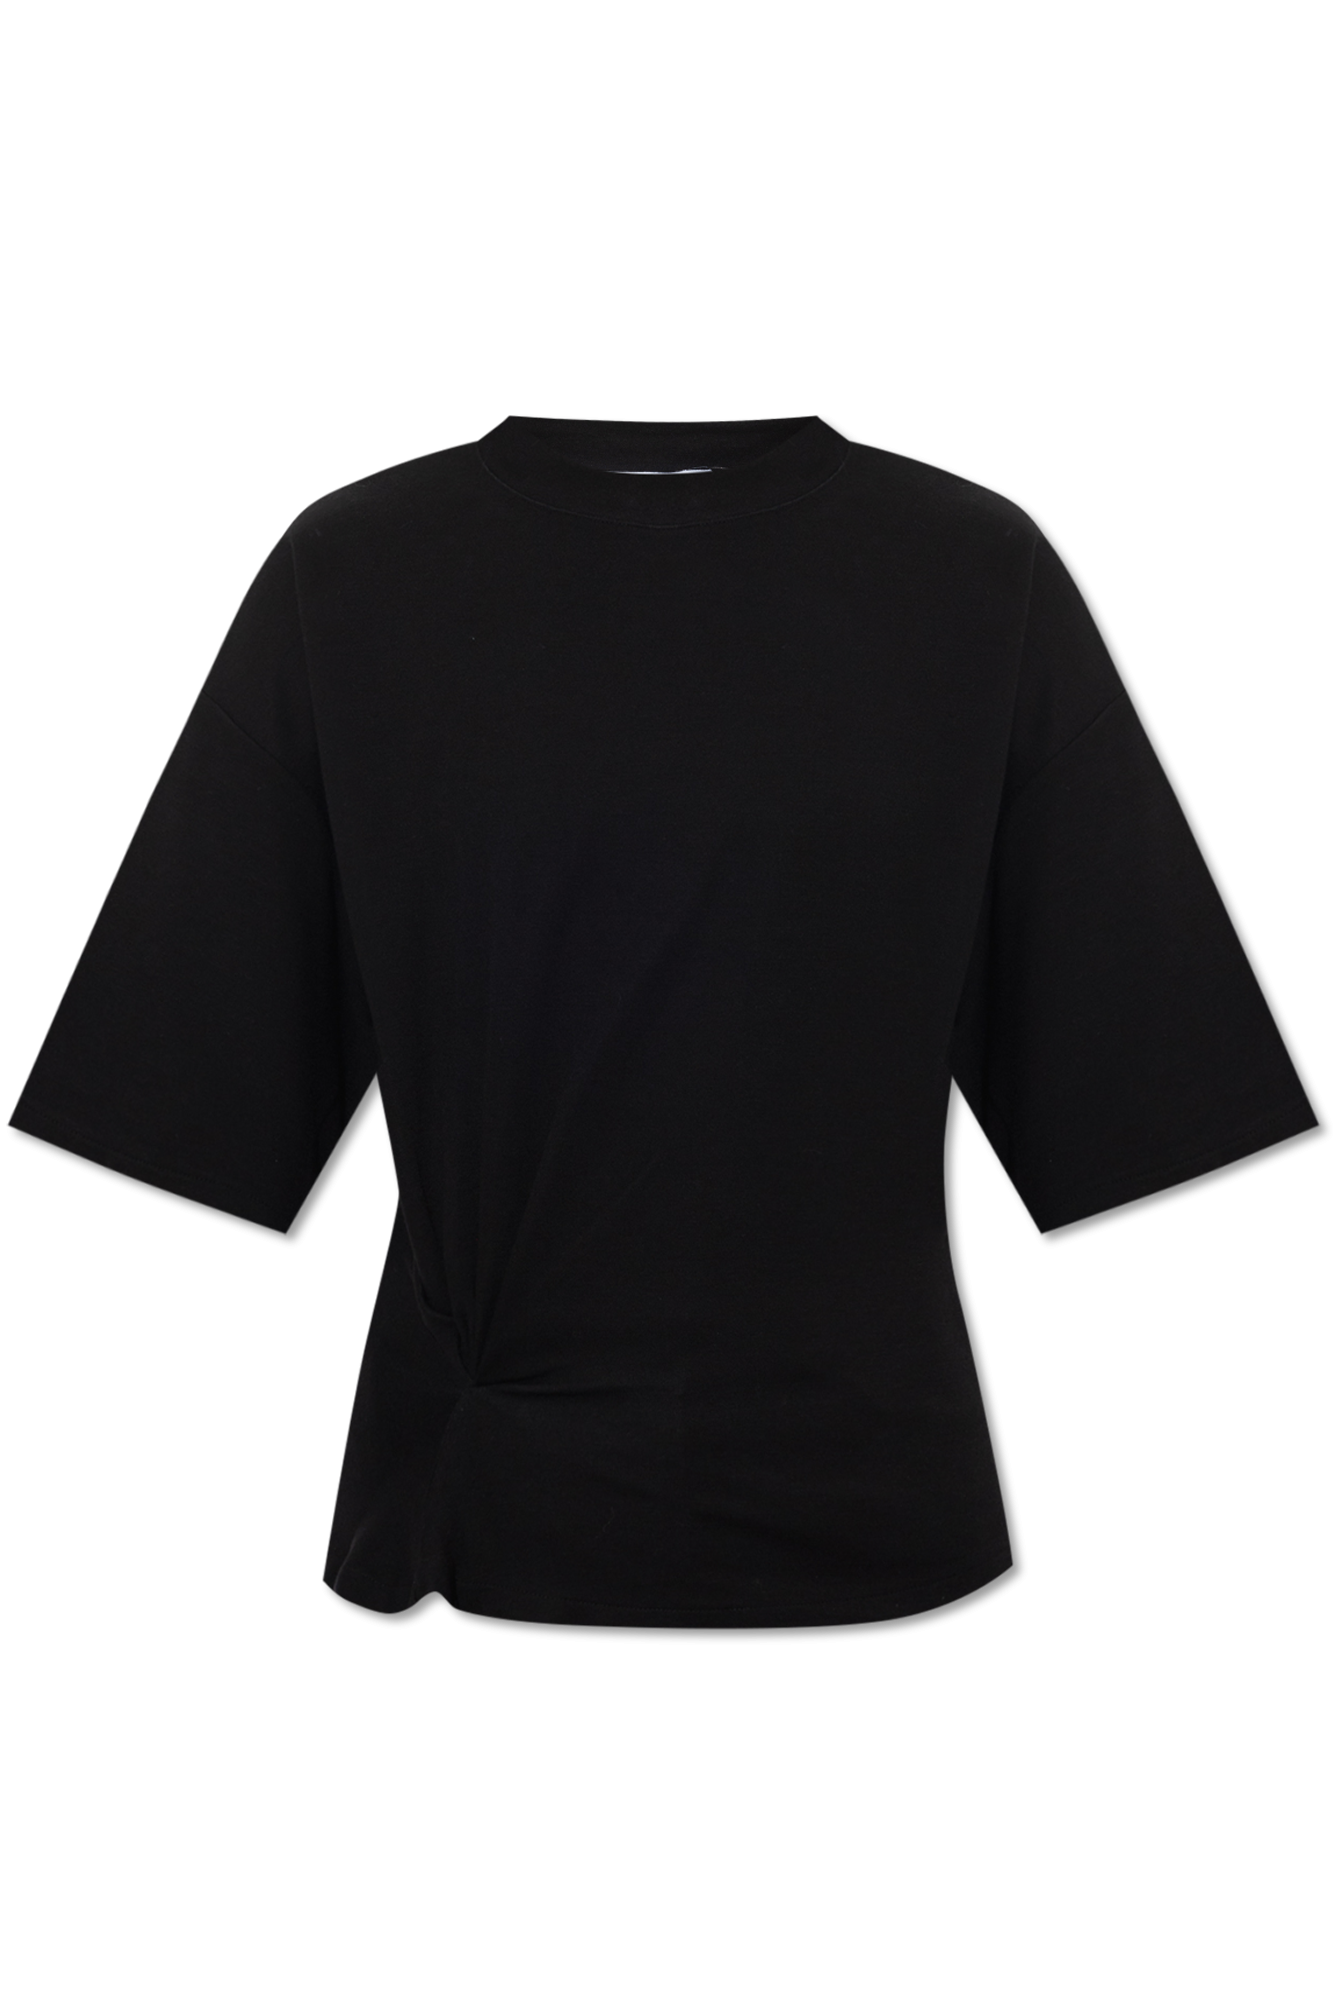 Black - with IetpShops white belts Iro from - \'Garcia\' sweater refined T this crew - shirt things Norway Keep